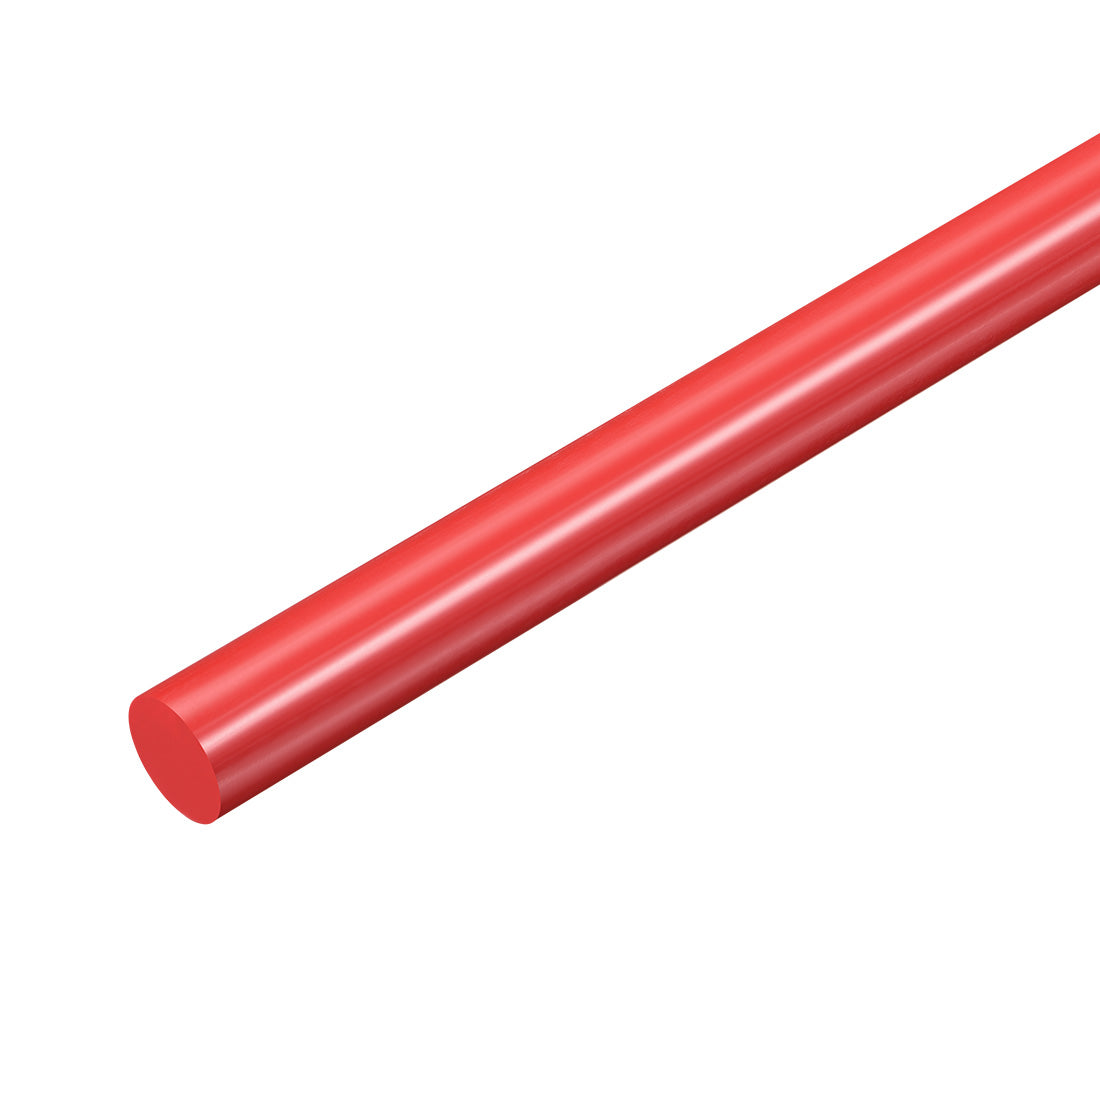 uxcell Uxcell Plastic Round Rod,12mm Dia 50cm Red Engineering Plastic Round Bar